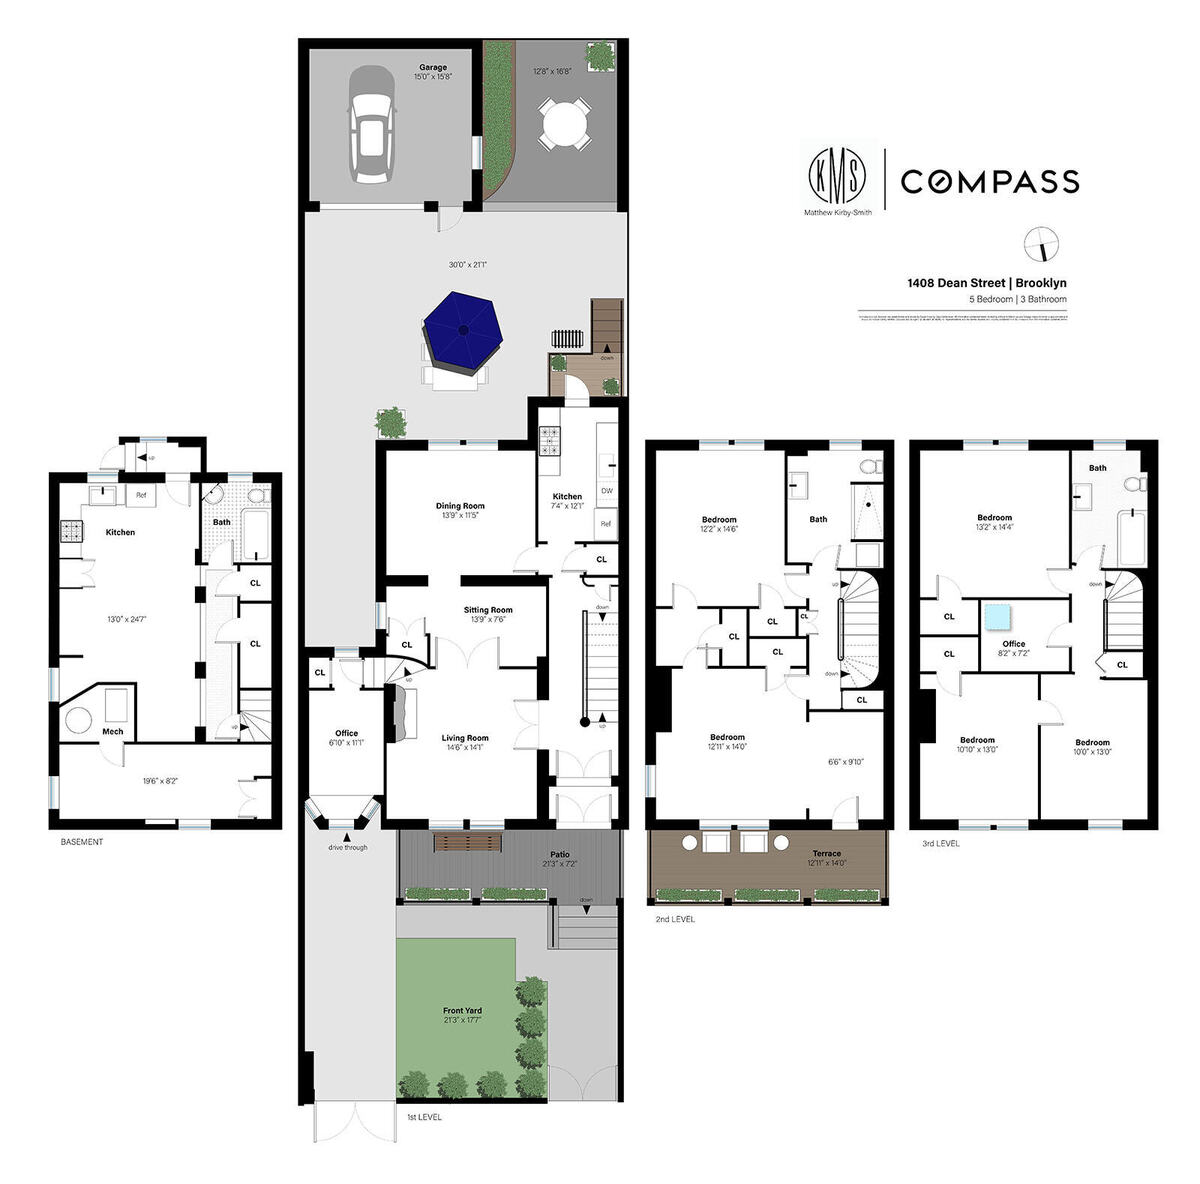 floorplan showing four floors and the garage at the rear of the yard